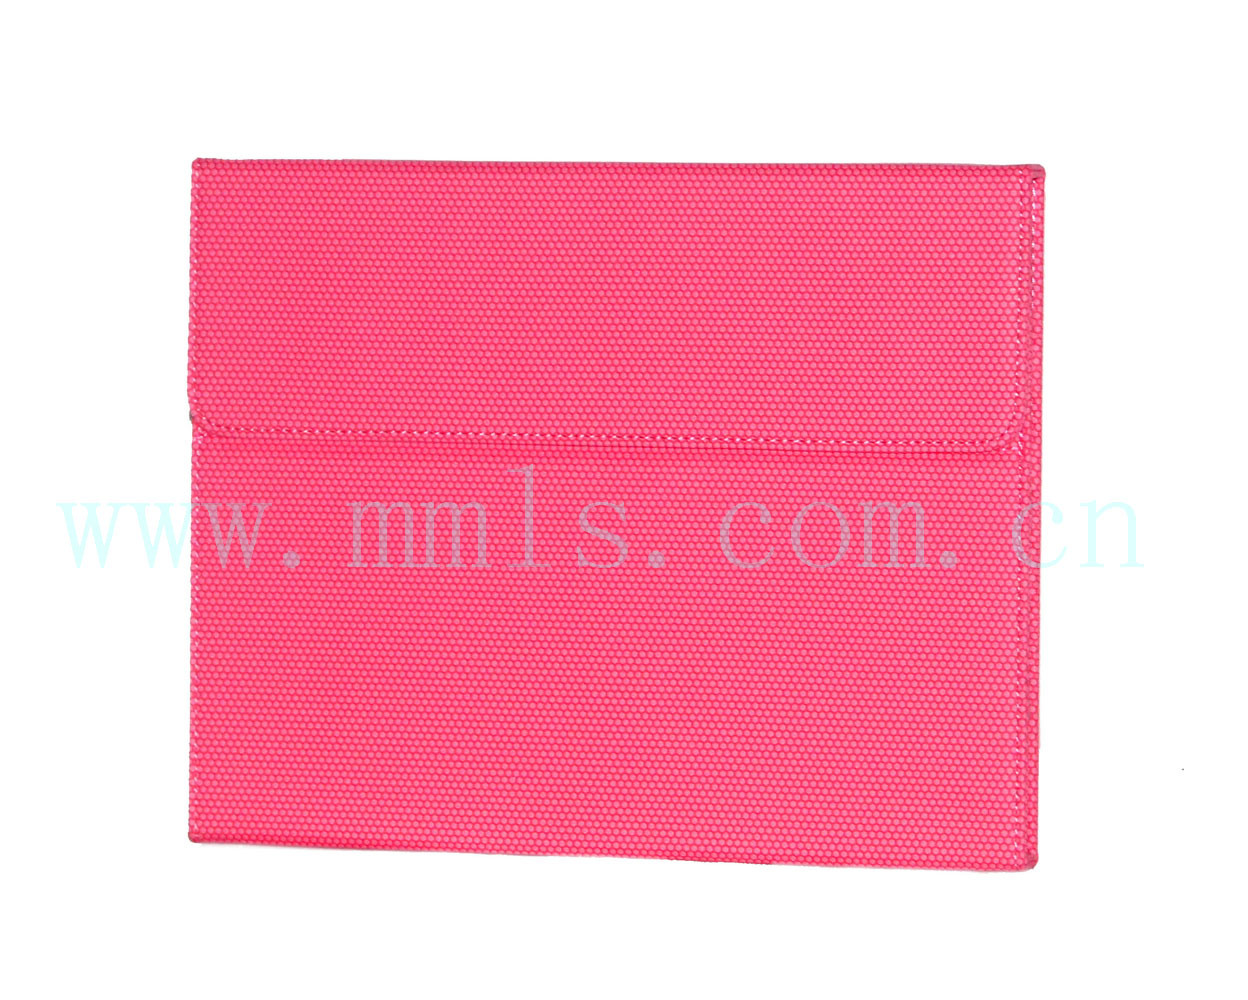 Case for iPad -P8001pink